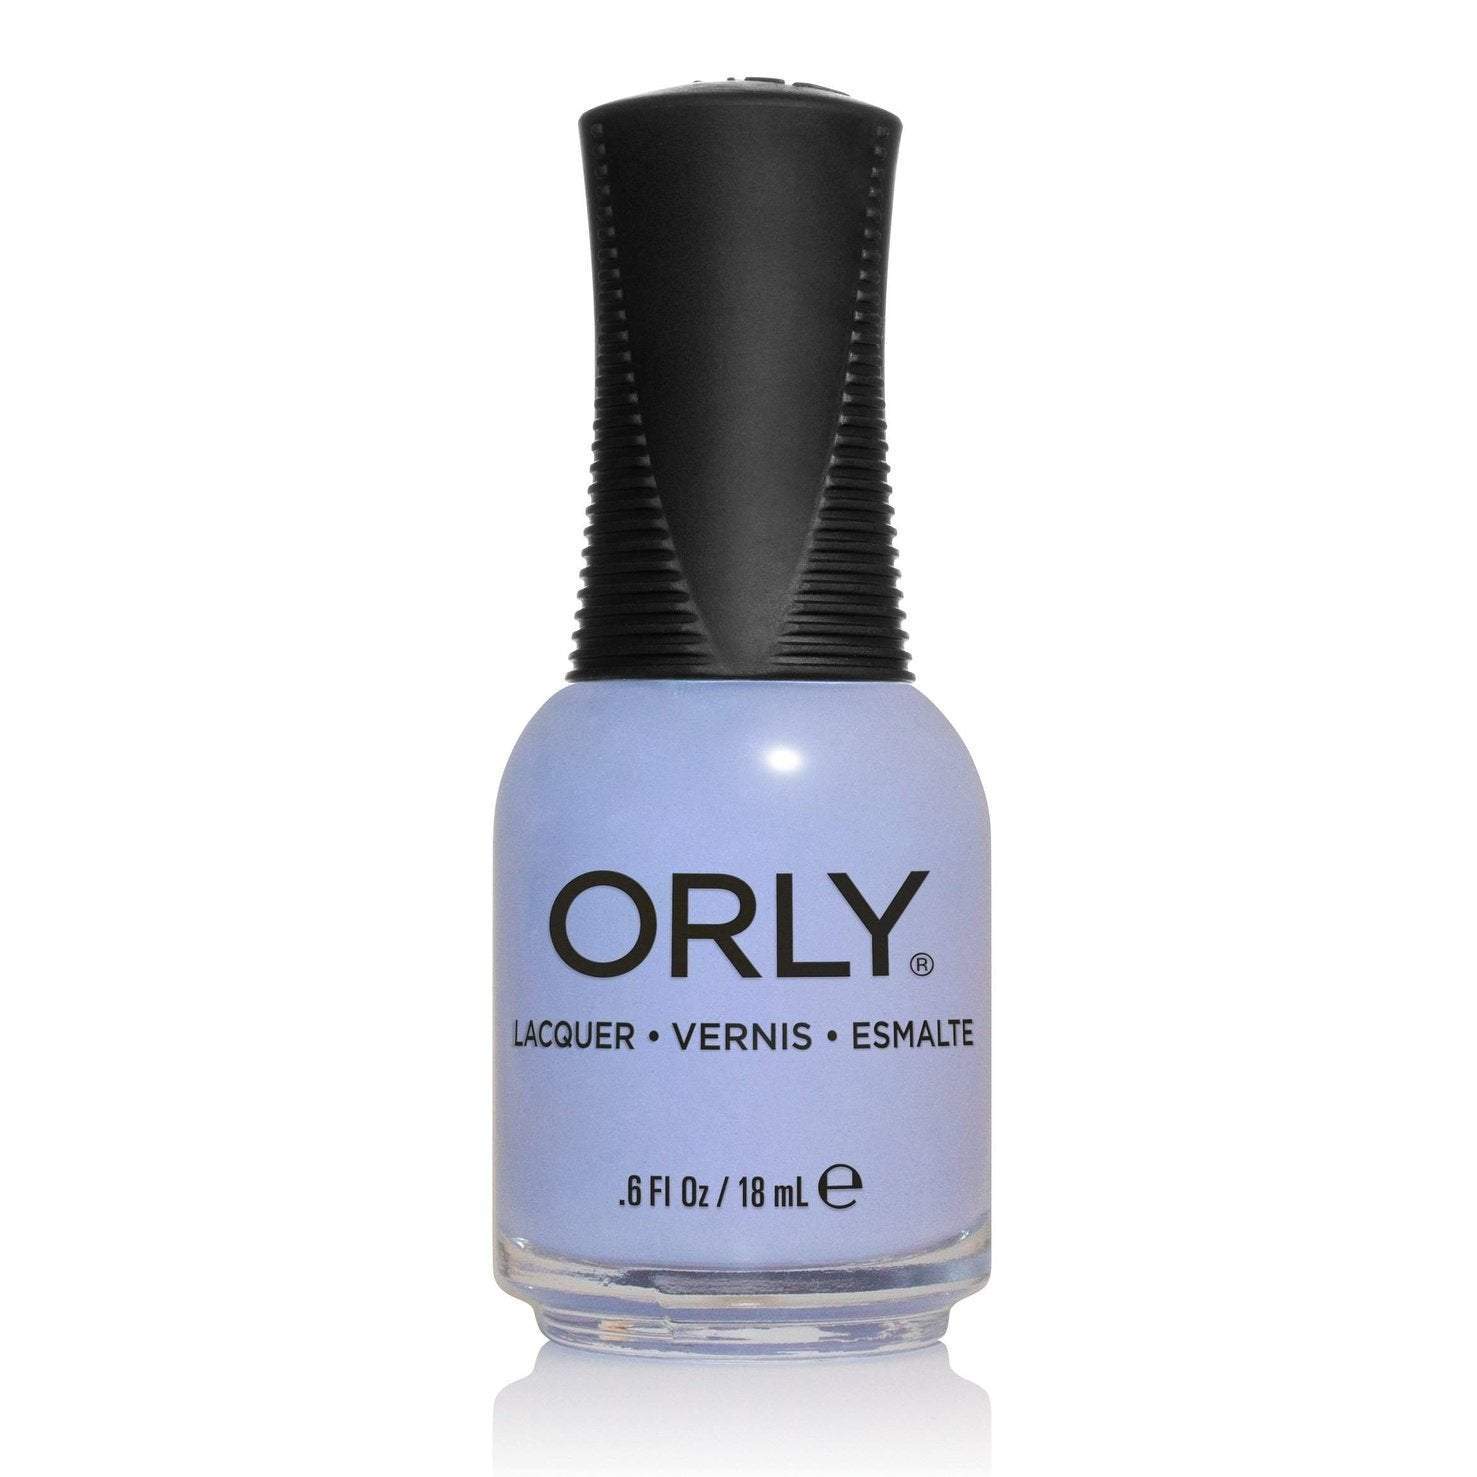 Orly Nail Lacquer Spirit Junkie .6fl oz-Orly-Brand_Orly,Collection_Nails,Nail_Polish,ORLY_Spring Laquers,Pride